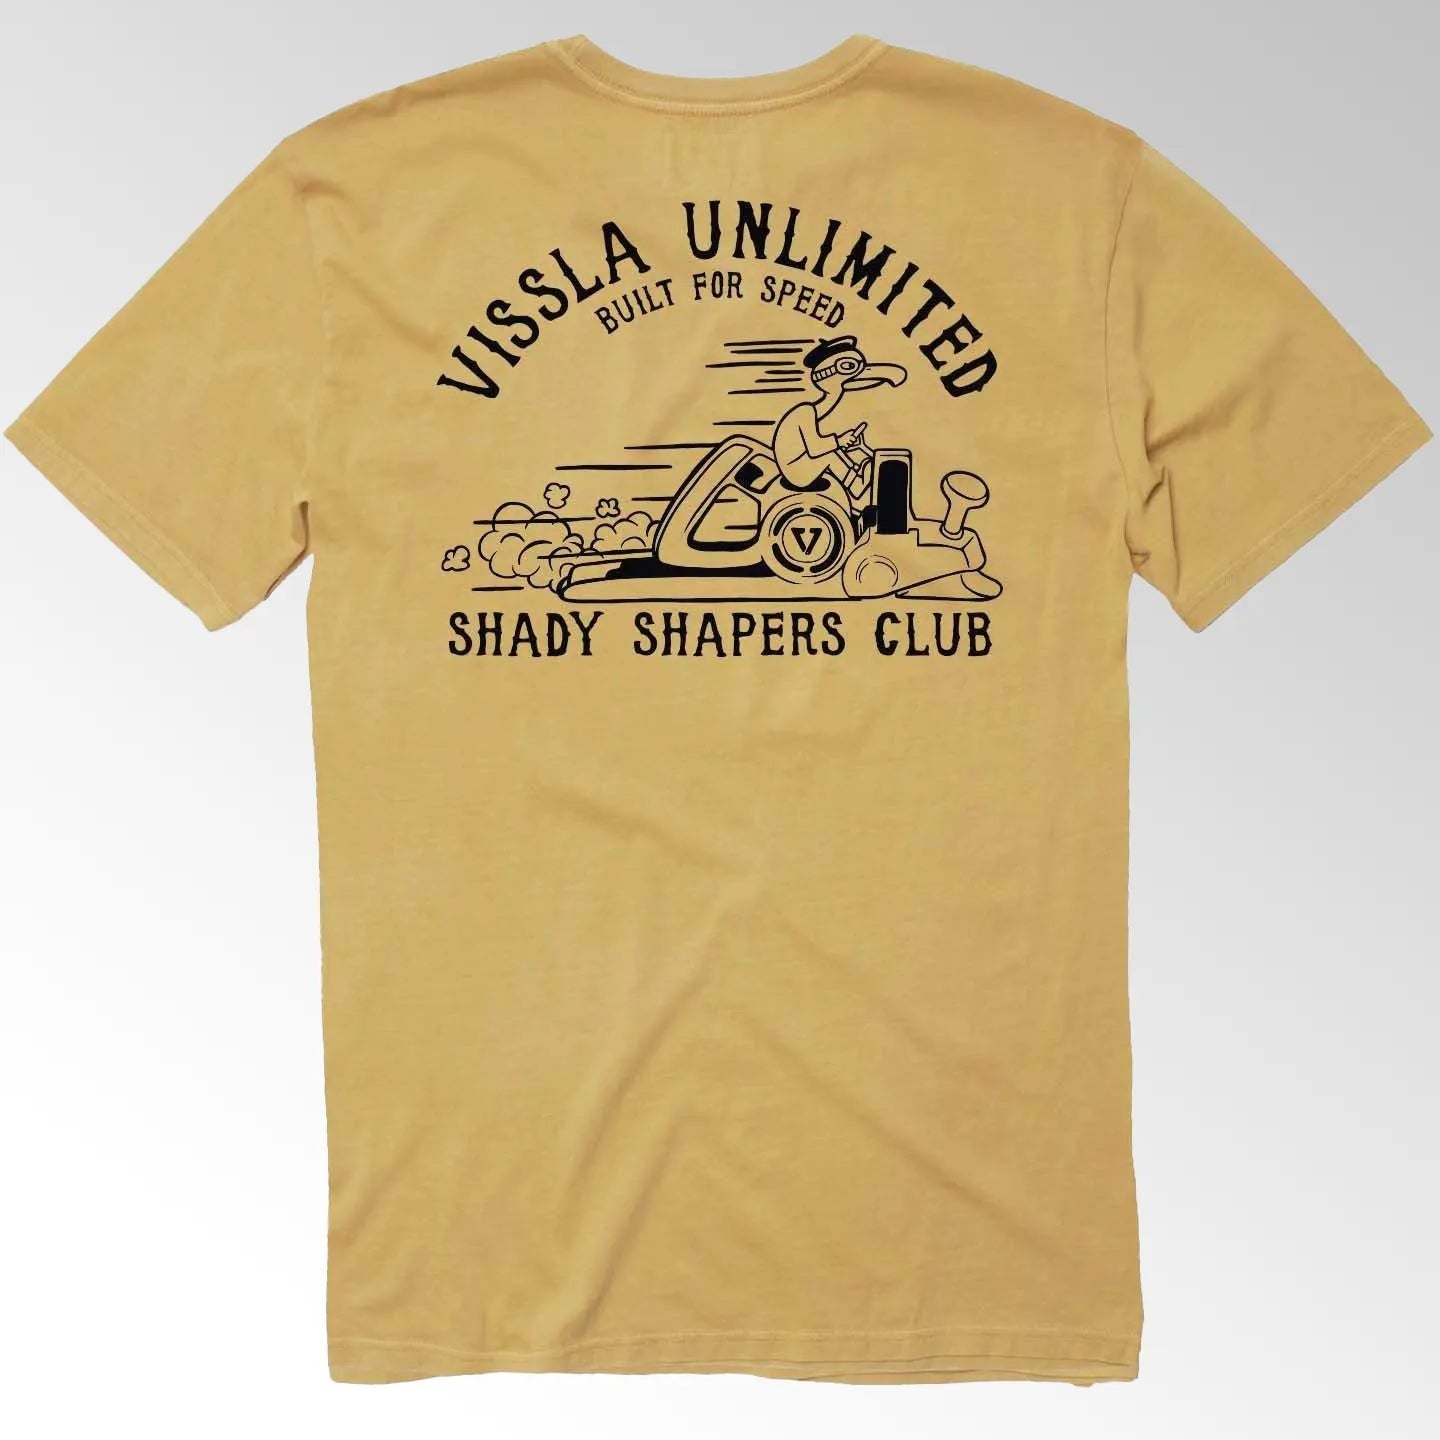 Shapers Club T-Shirt Ale - The Good Chic